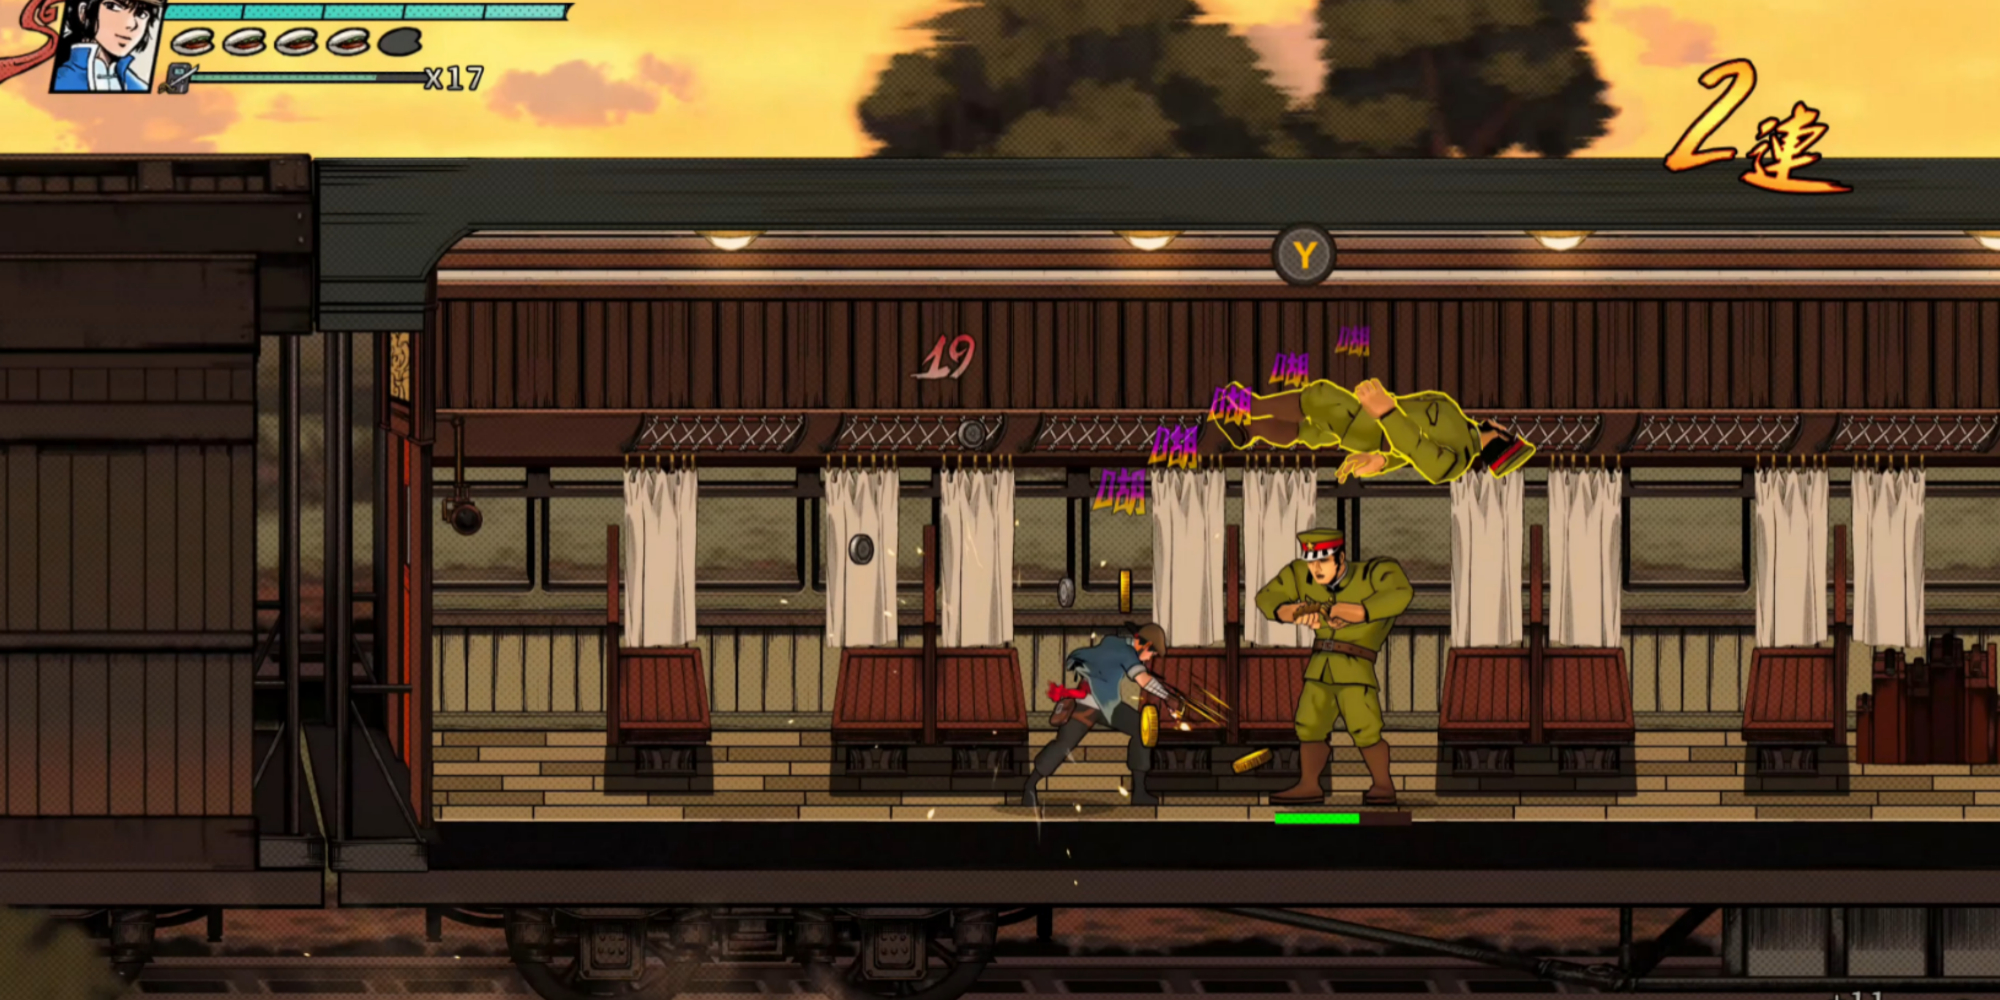 tianding pummeling a baddie on a train in the legend of tianding